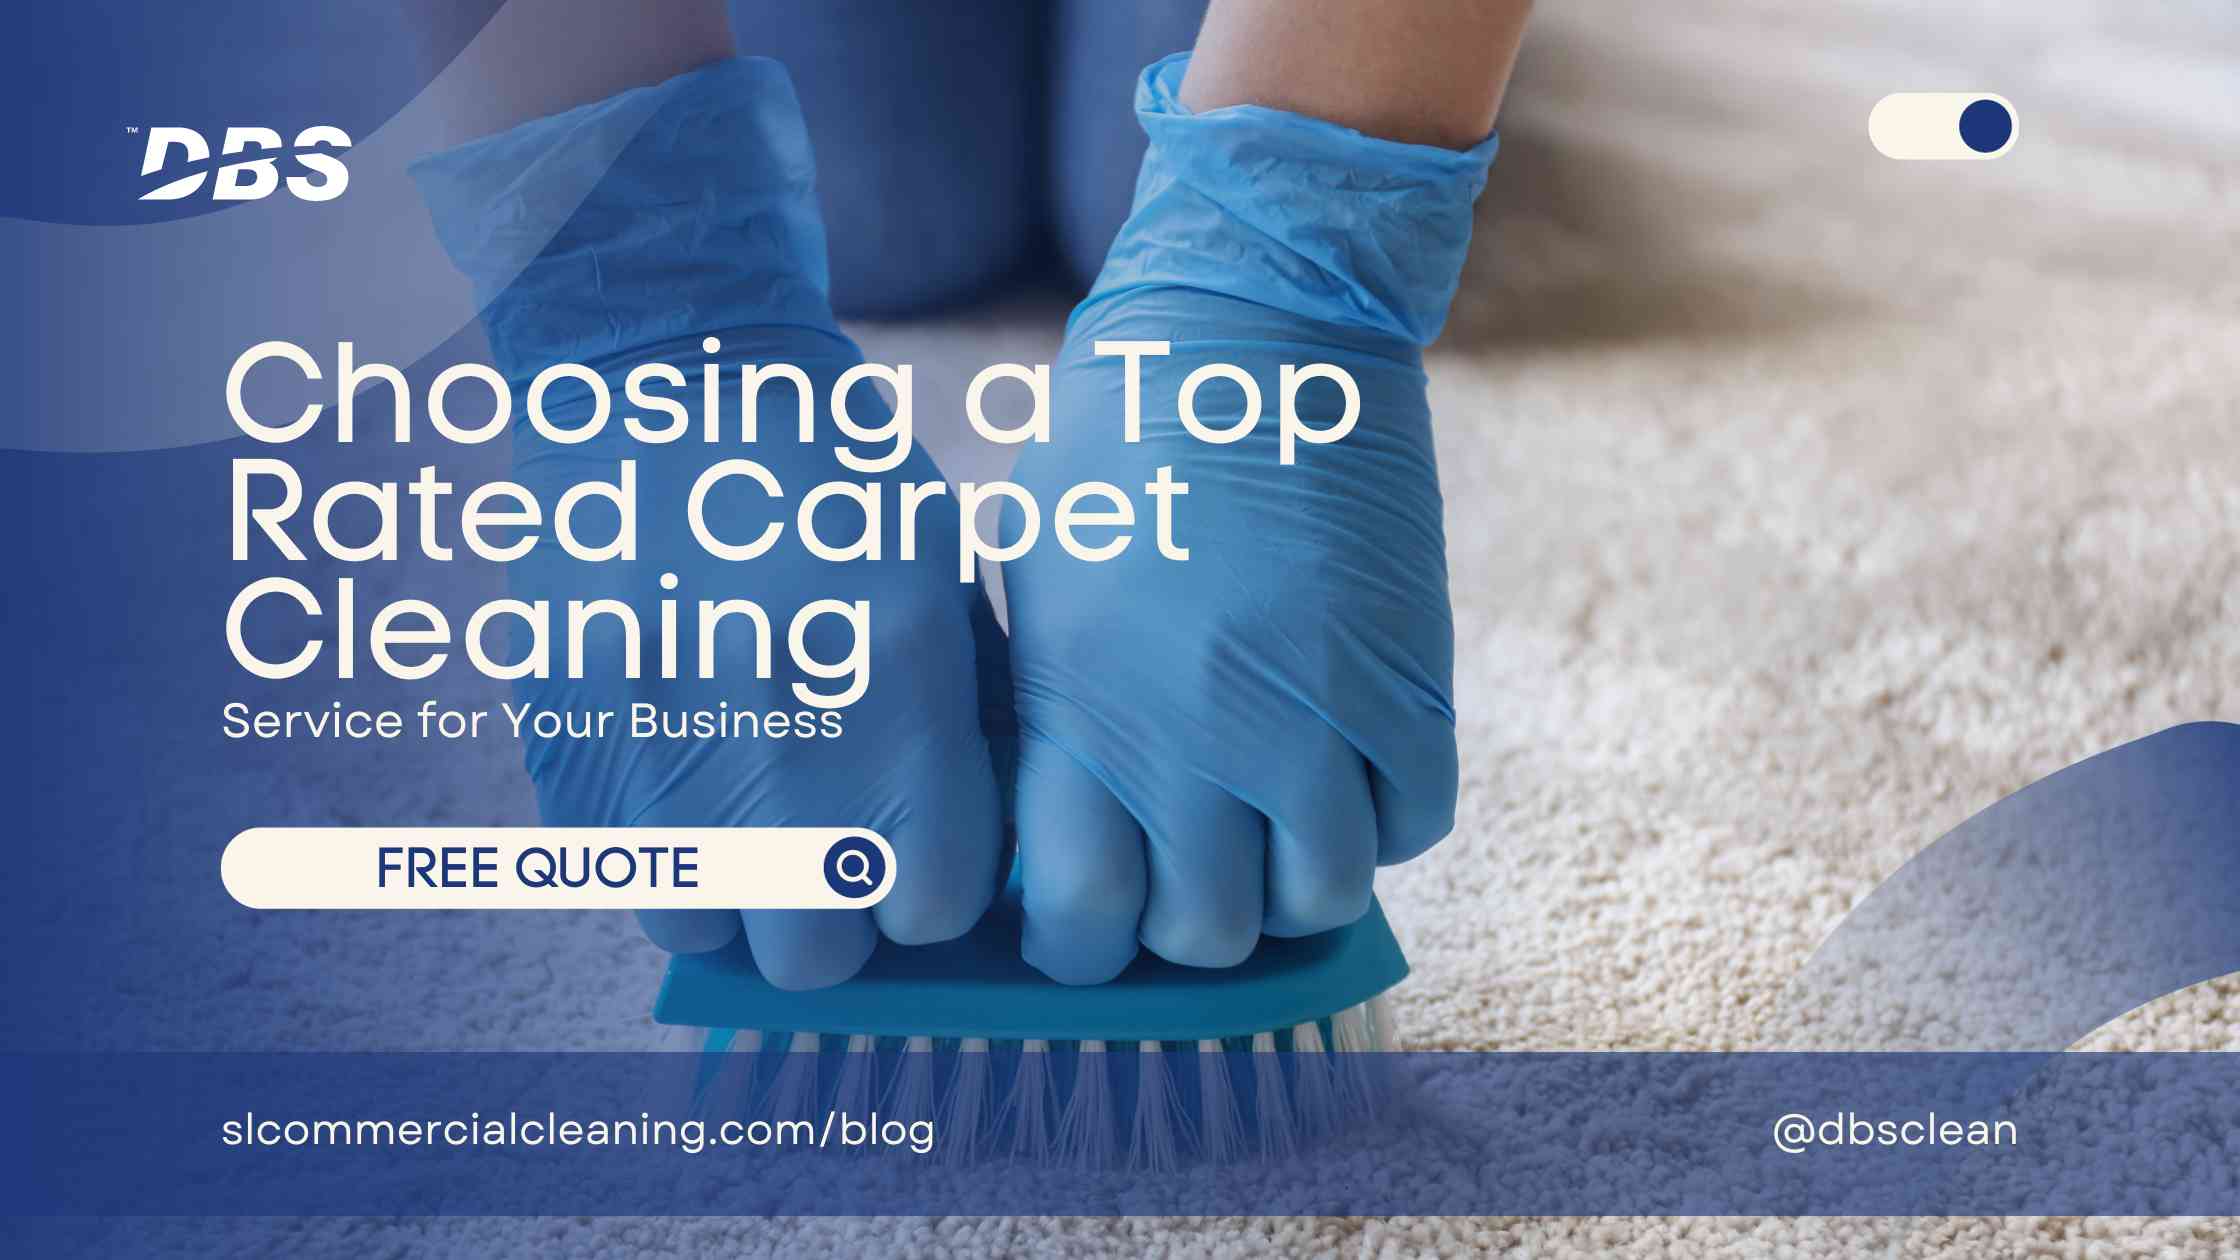 Top Rated Carpet Cleaning Service